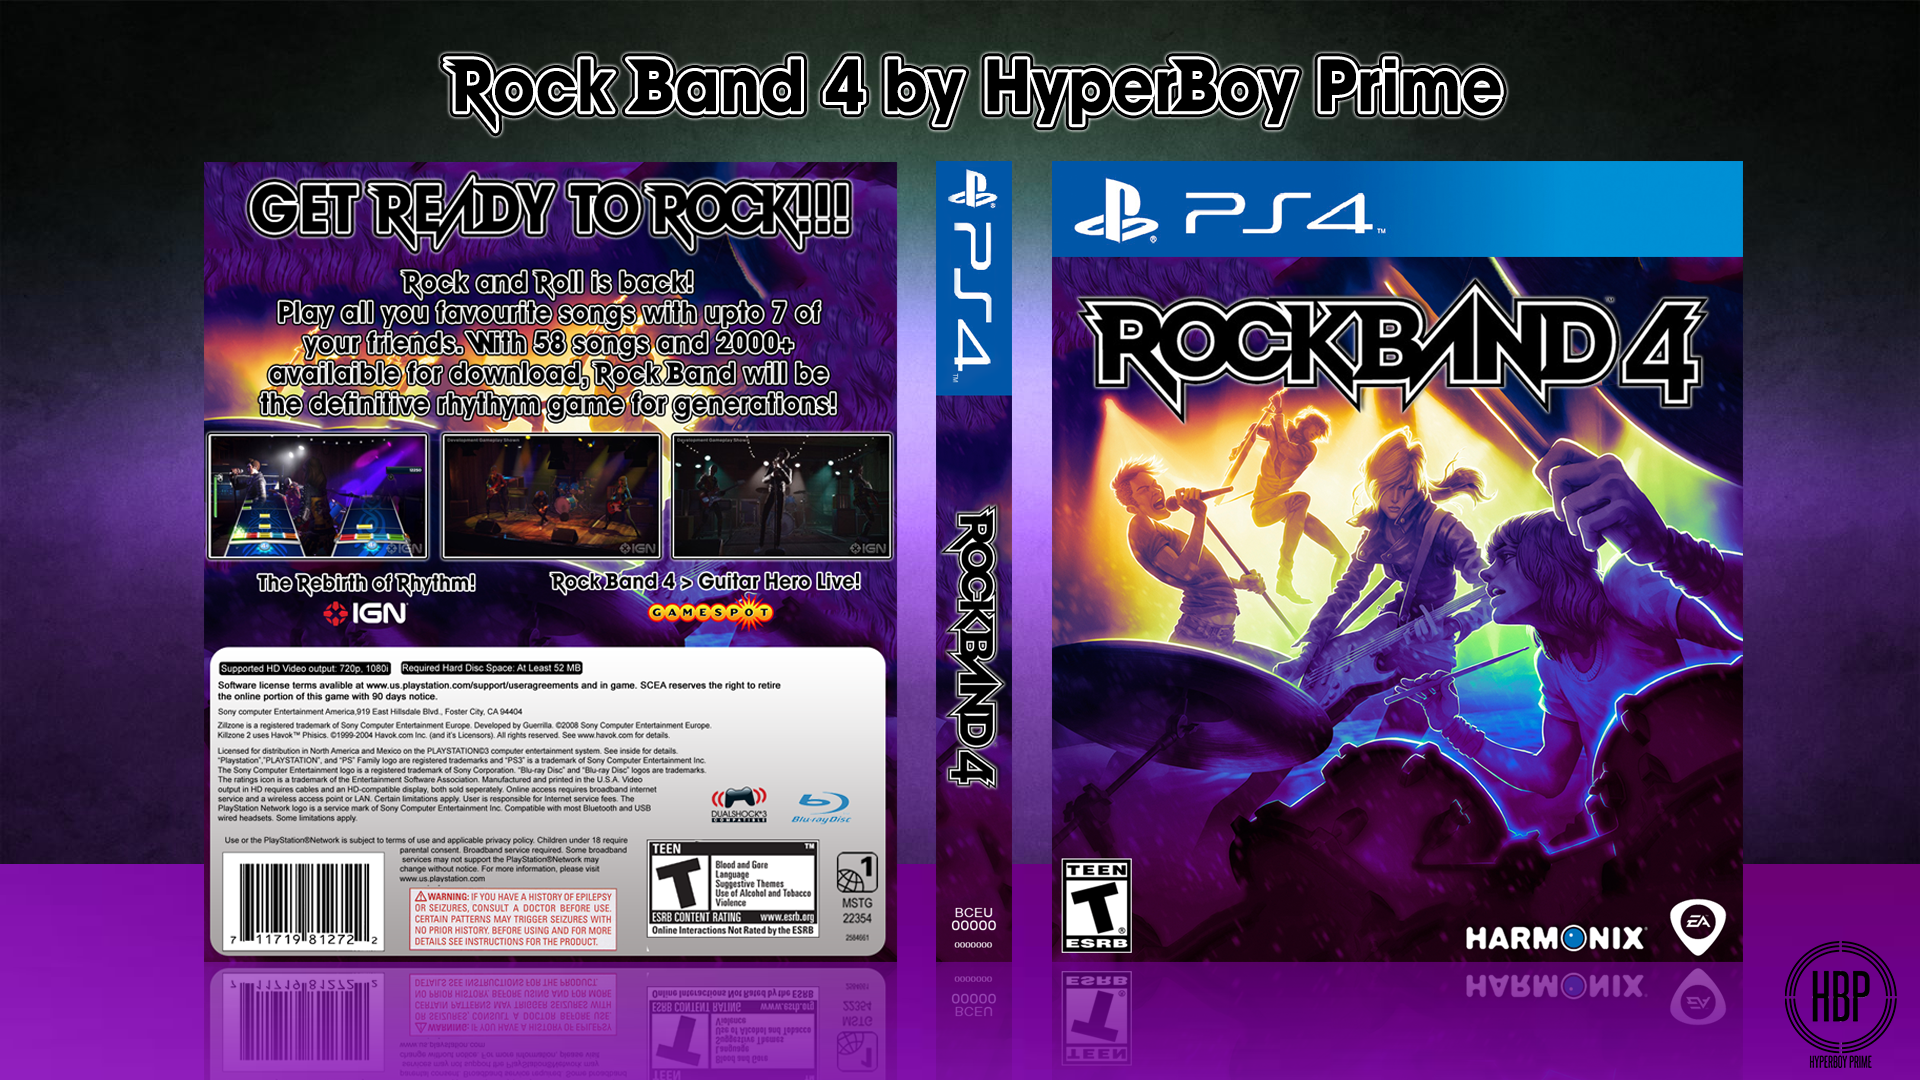 Rock Band 4 box cover